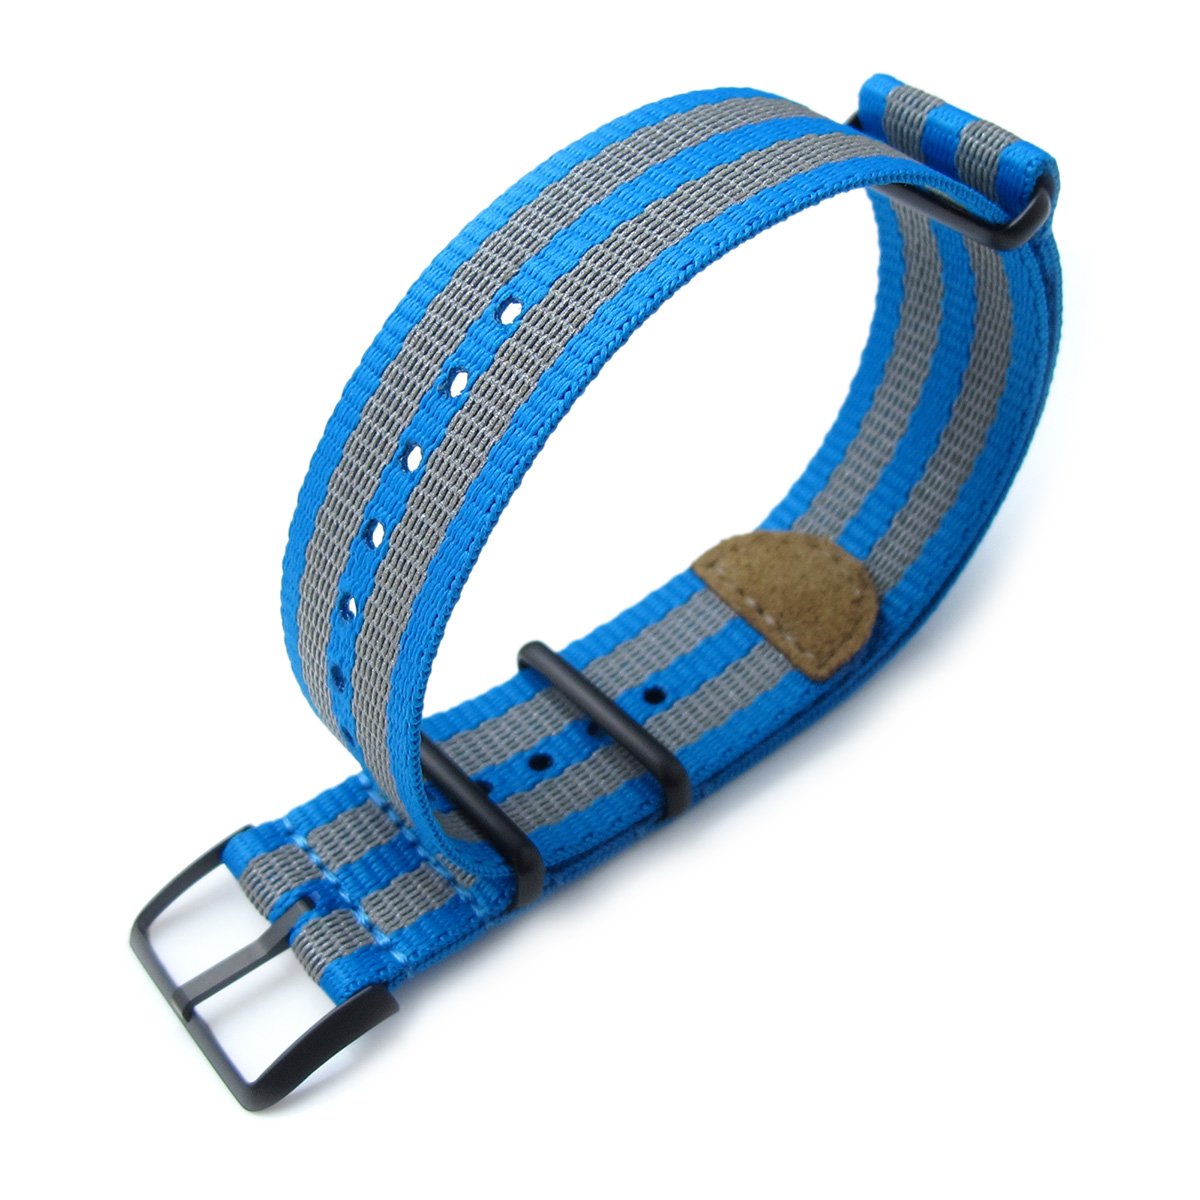 MiLTAT 22mm G10 NATO 3M Glow-in-the-Dark Watch Strap PVD Black Blue and Grey Stripes Strapcode Watch Bands